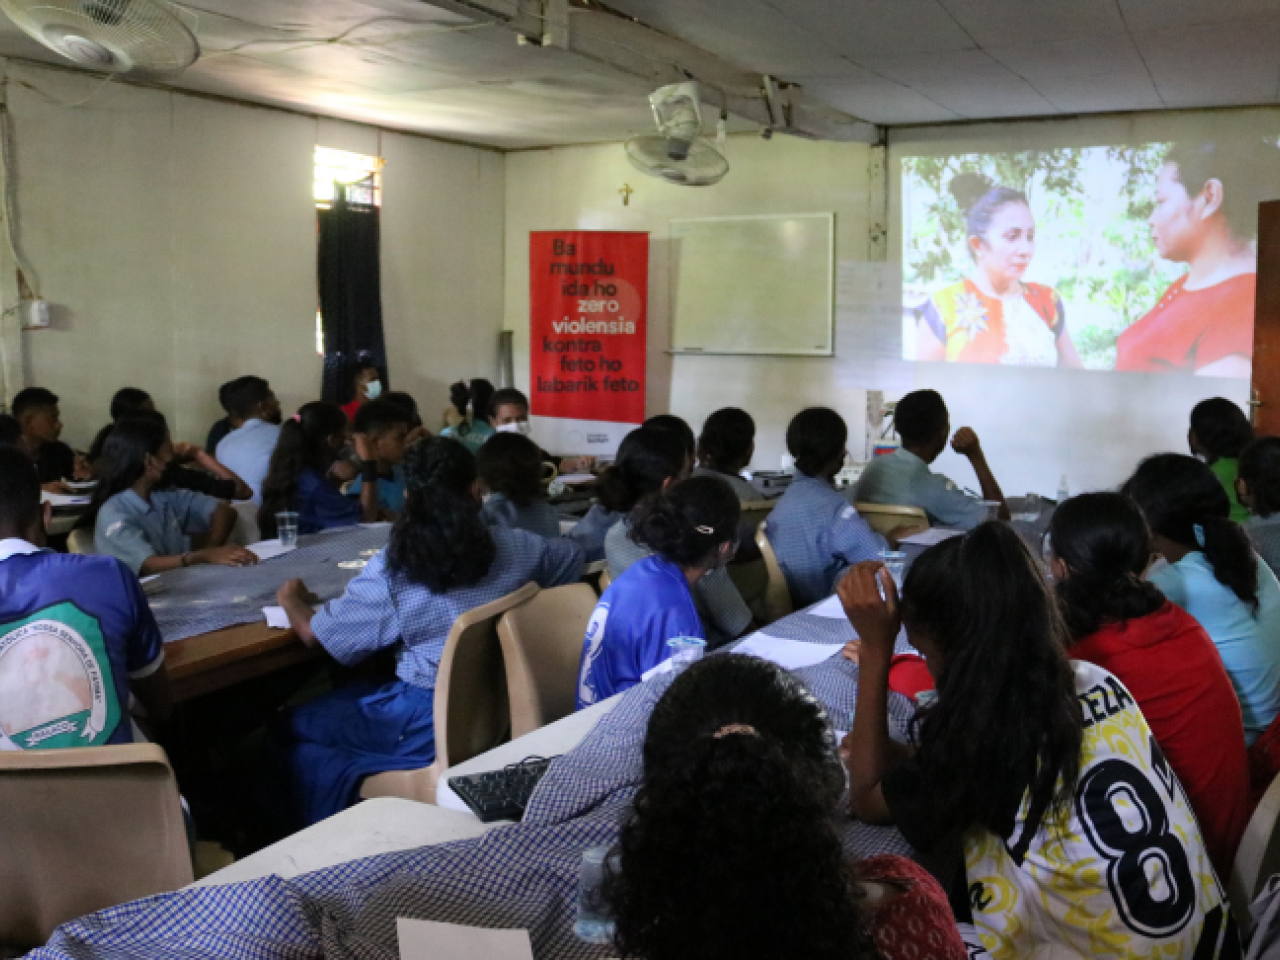 Young people watch a film screening in a class room